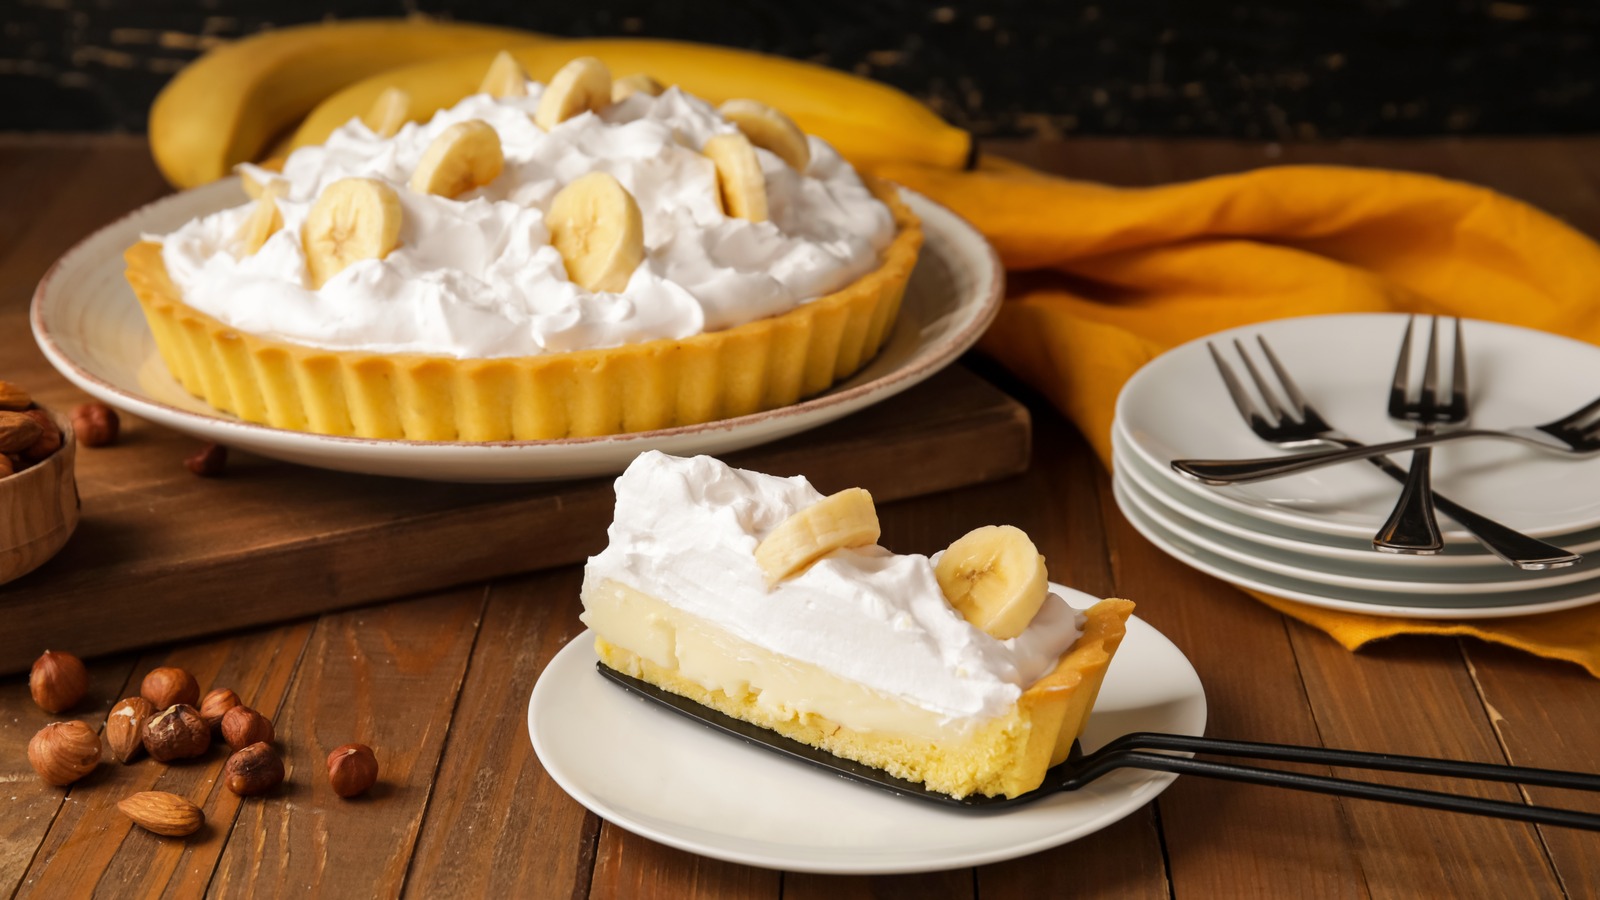 How do you keep bananas from turning brown in a banana cream pie?